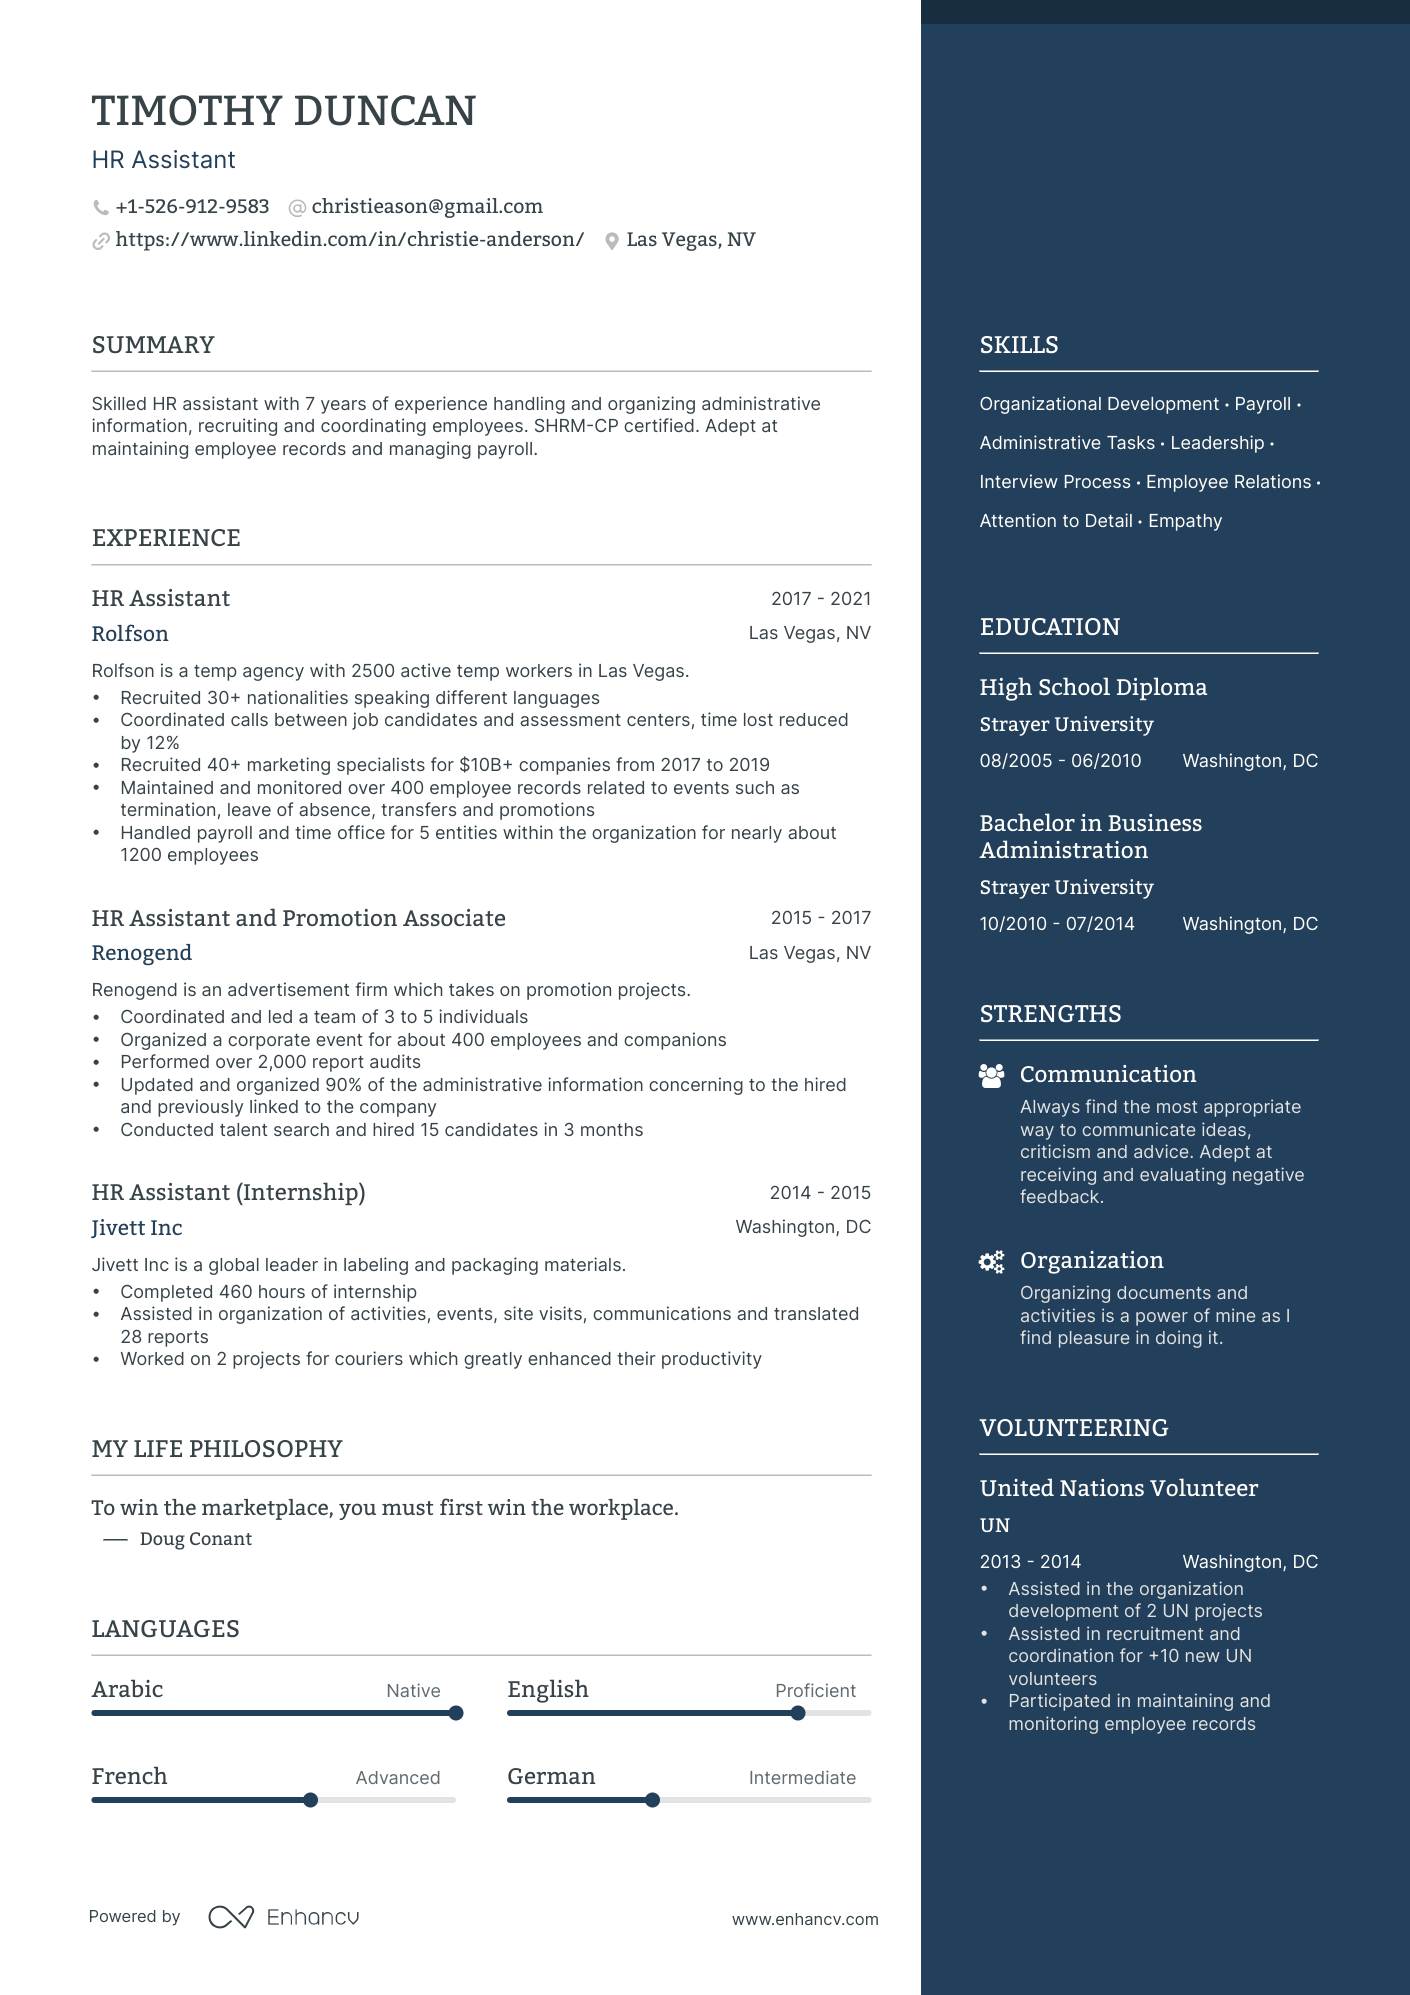 human resources assistant skills resume